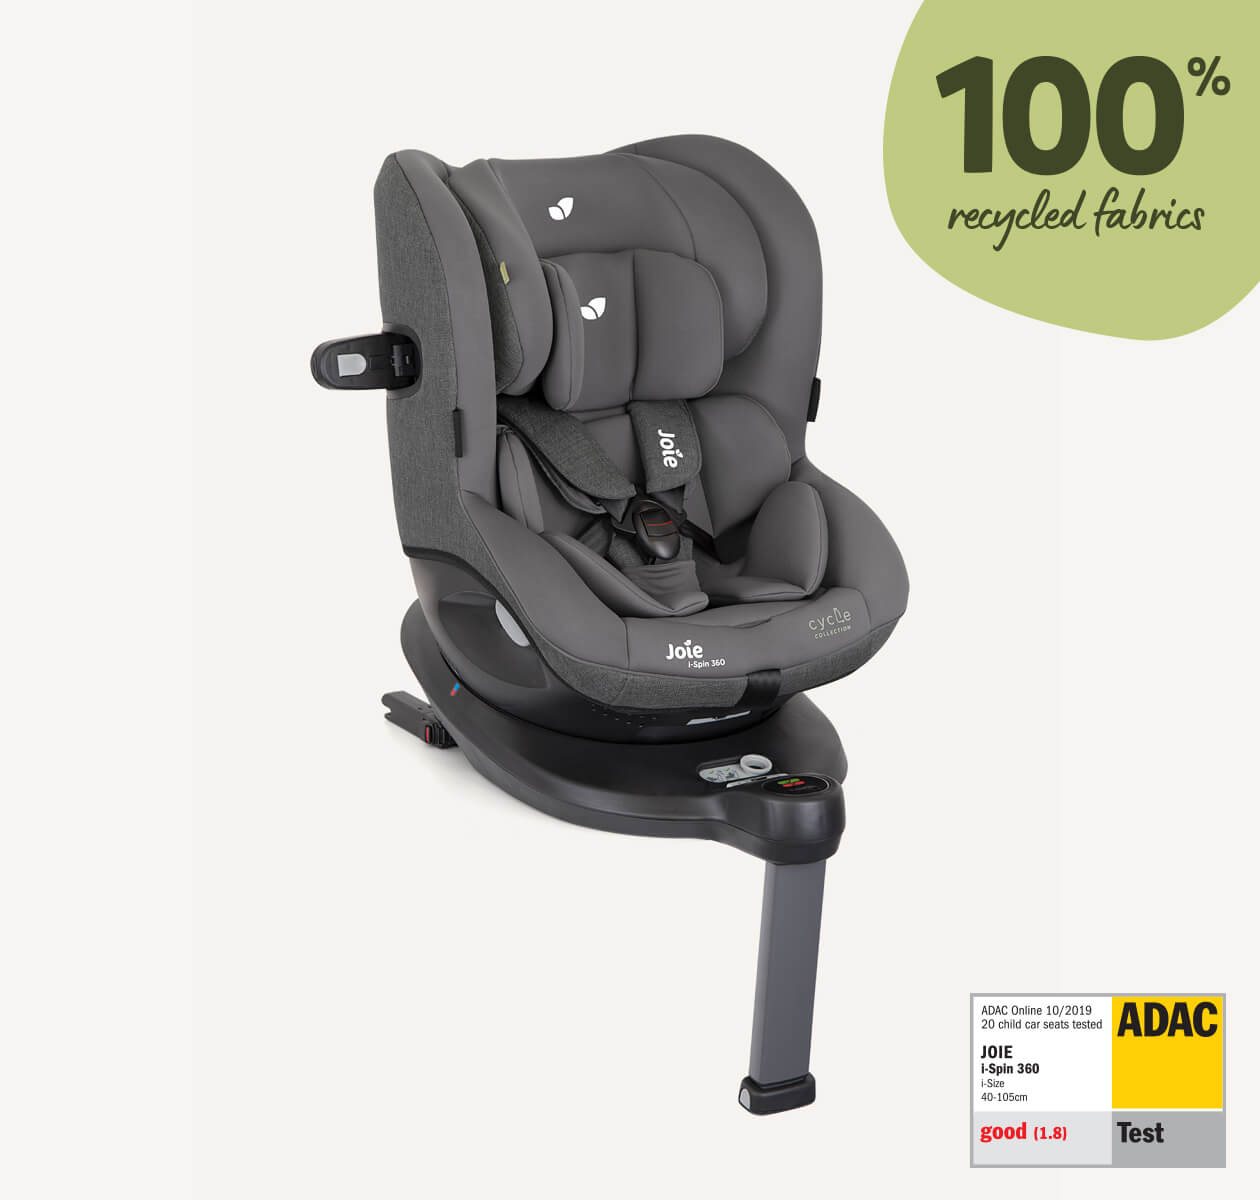 Gray Joie I-Spin 360 spinning car seat facing to the right at a 45 degree angle with the infant insert in and the headrest at the lowest position, with the ADAC test label in the lower right corner.